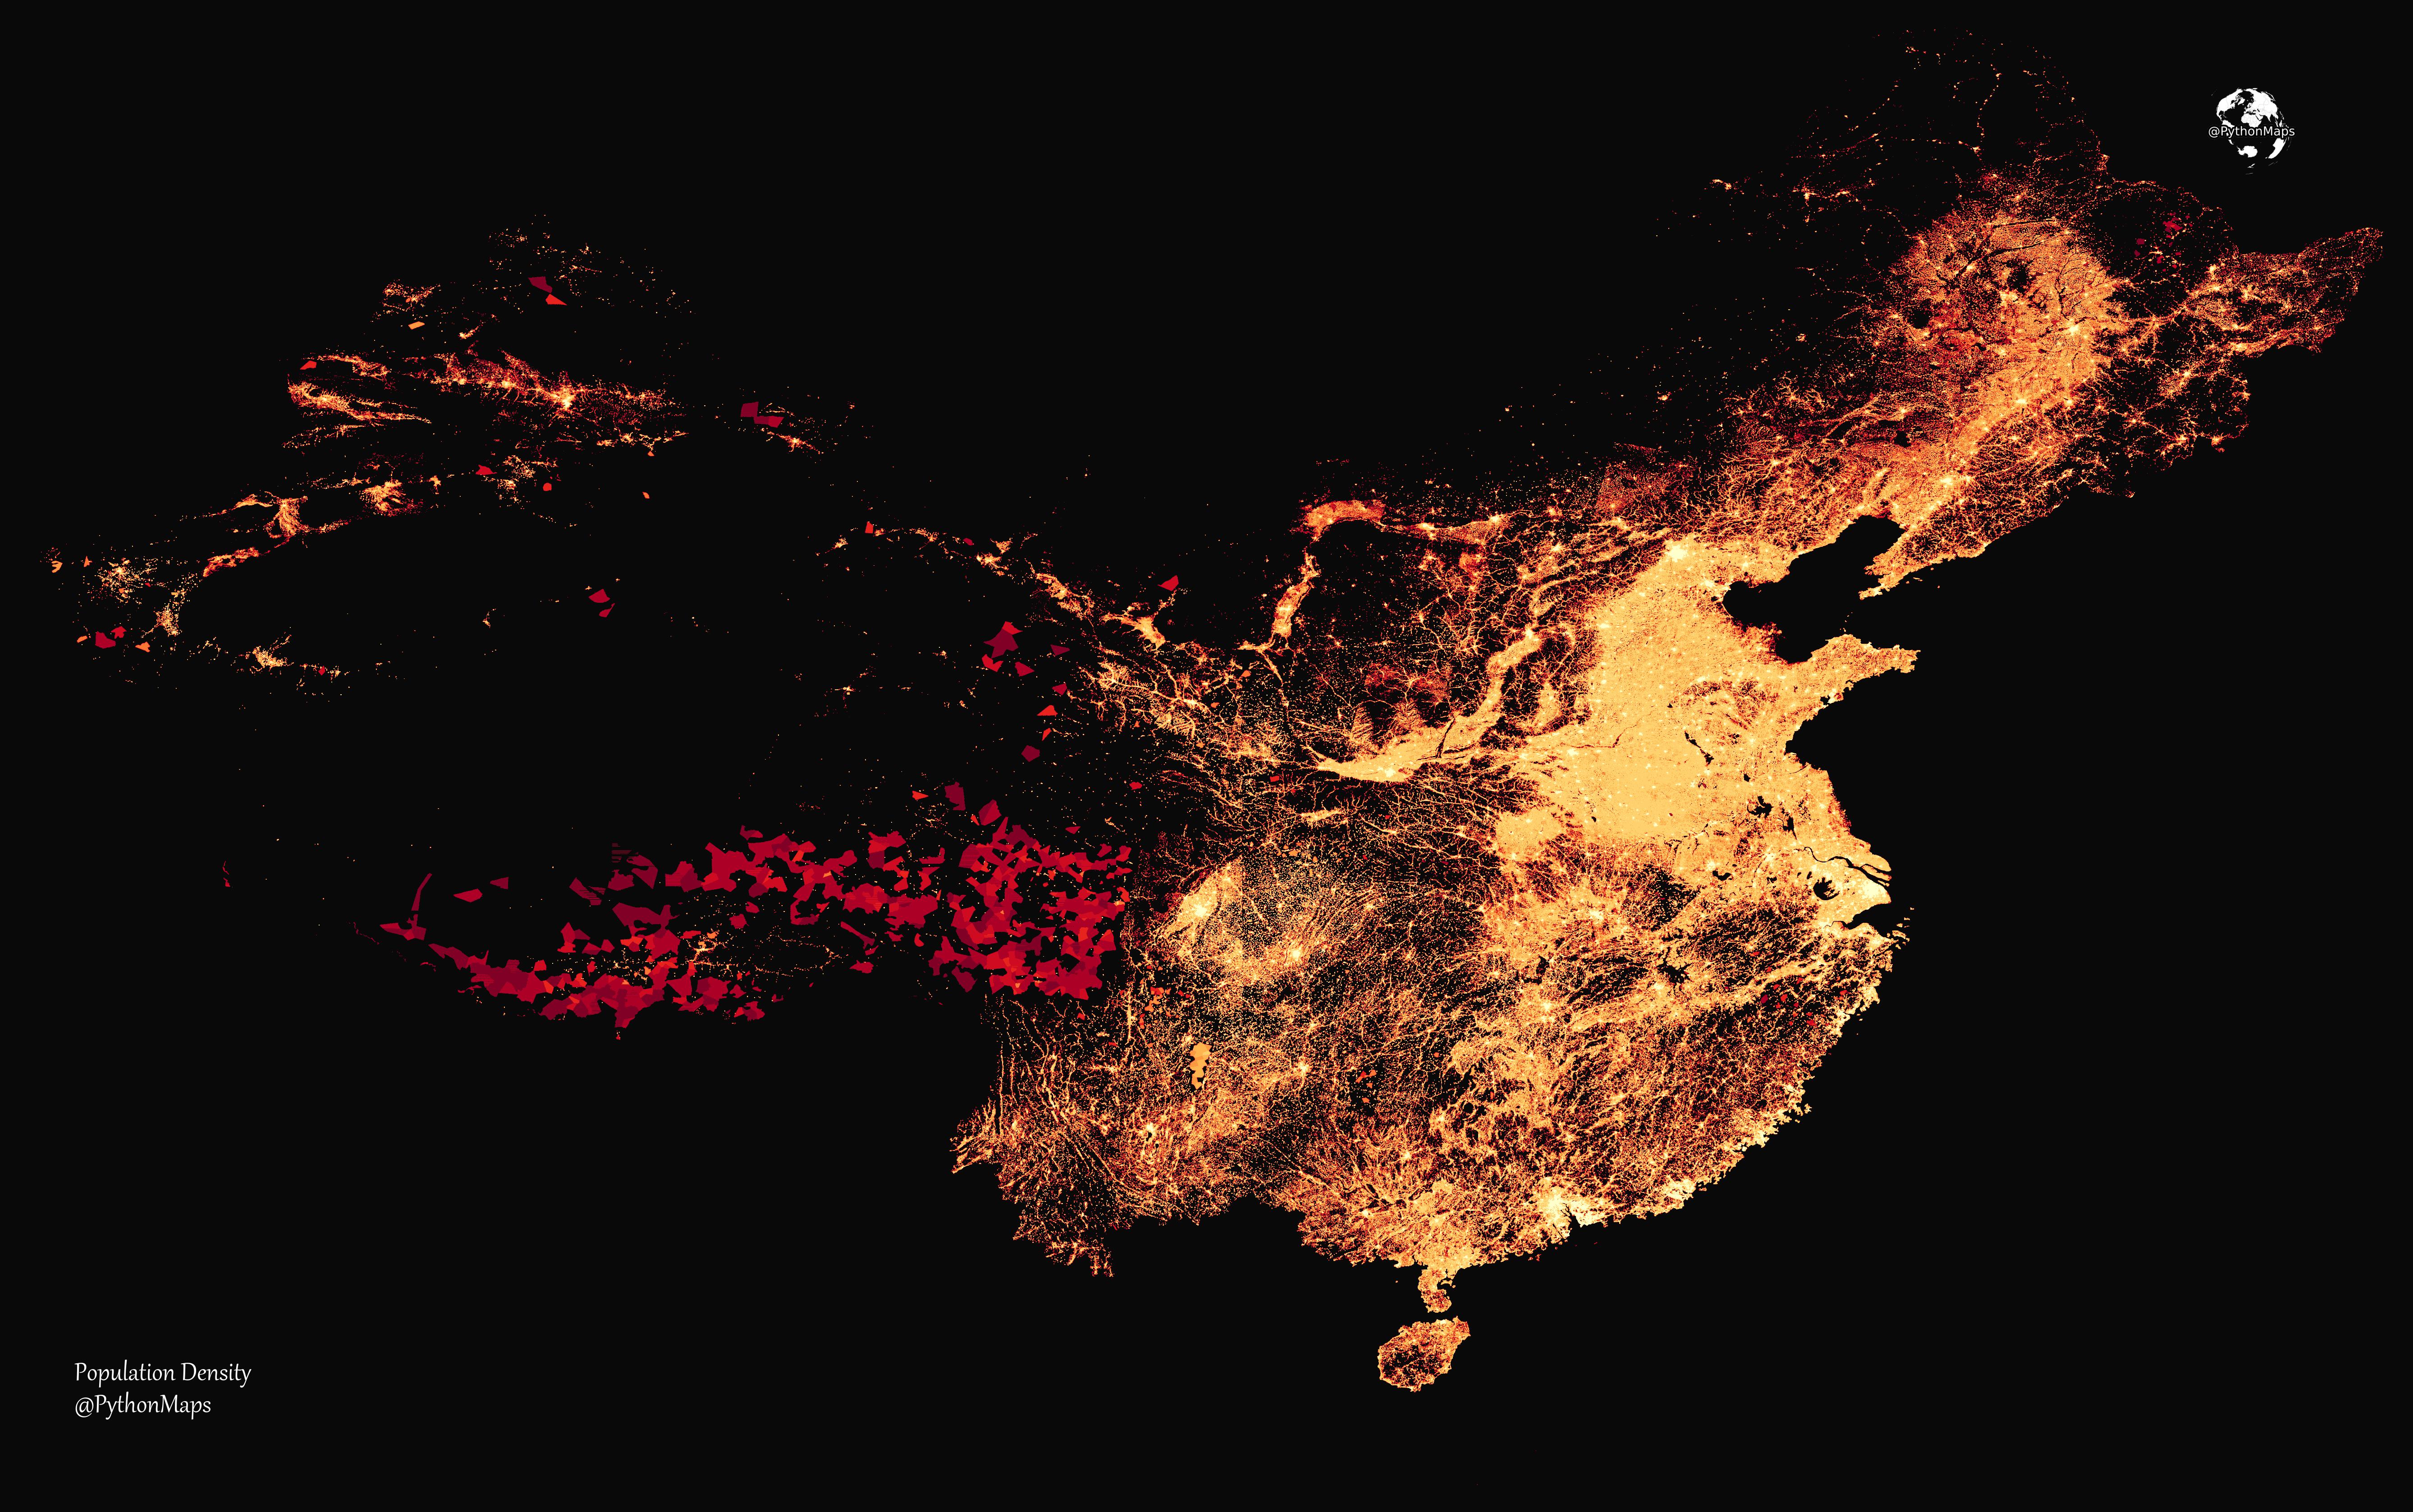 The Population density of China